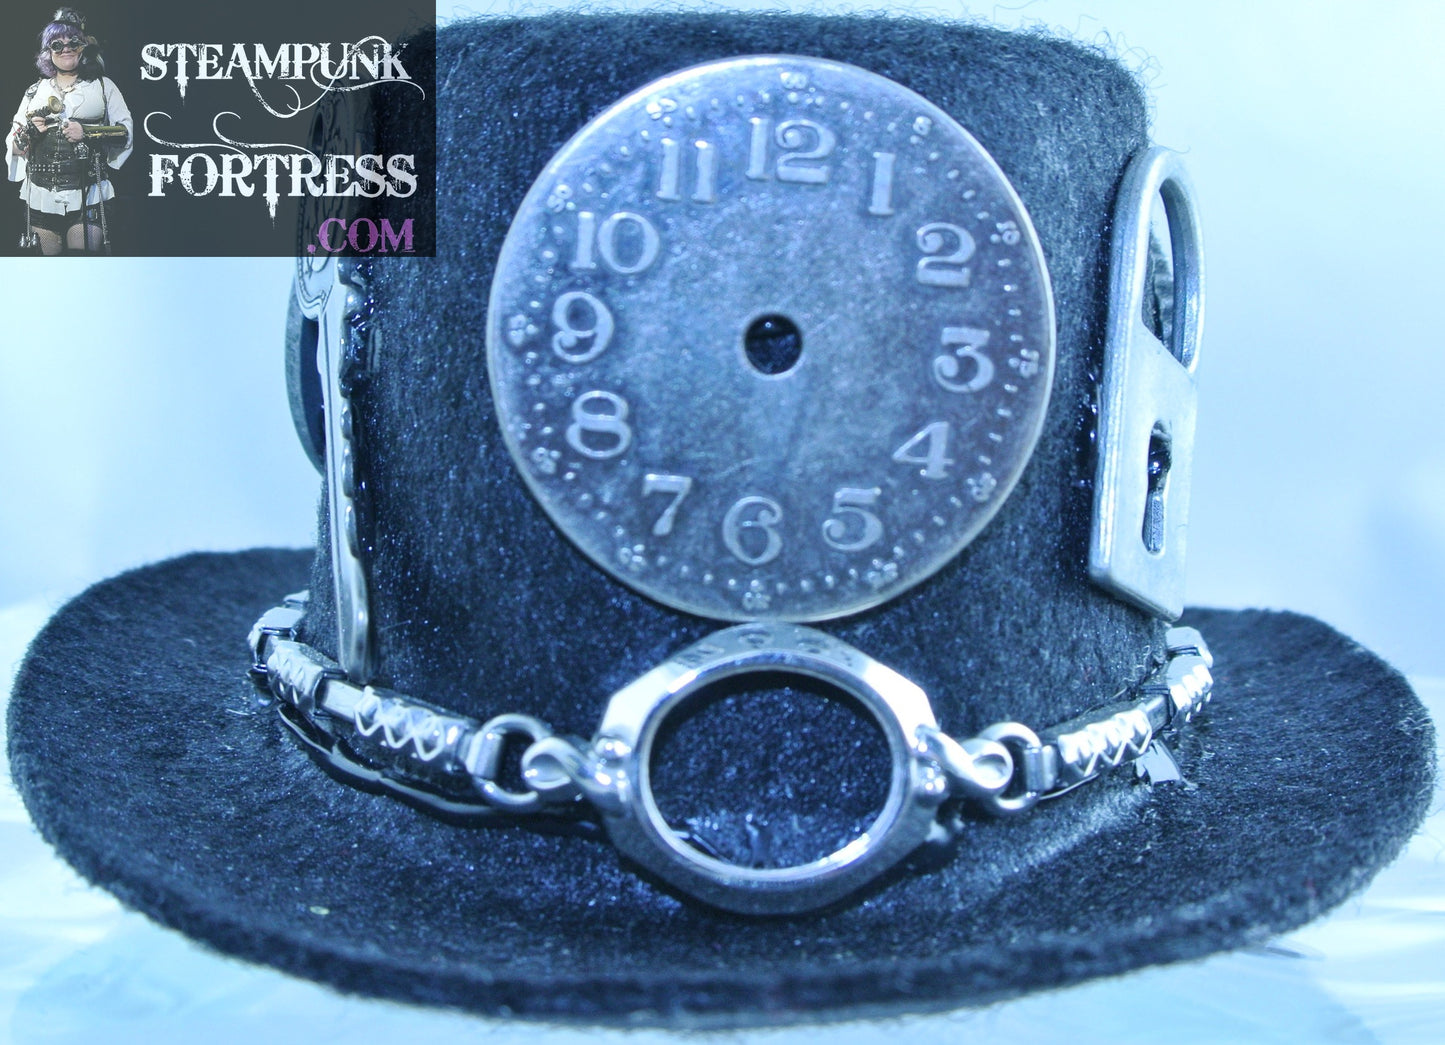 BLACK SILVER CLOCK WATCH DIAL FACE LOCK GEAR KNOW WORD STICK JOURNEY TOKEN GEAR KEY WATCH BAND XS EXTRA SMALL MINI TOP HAT STARR WILDE STEAMPUNK FORTRESS